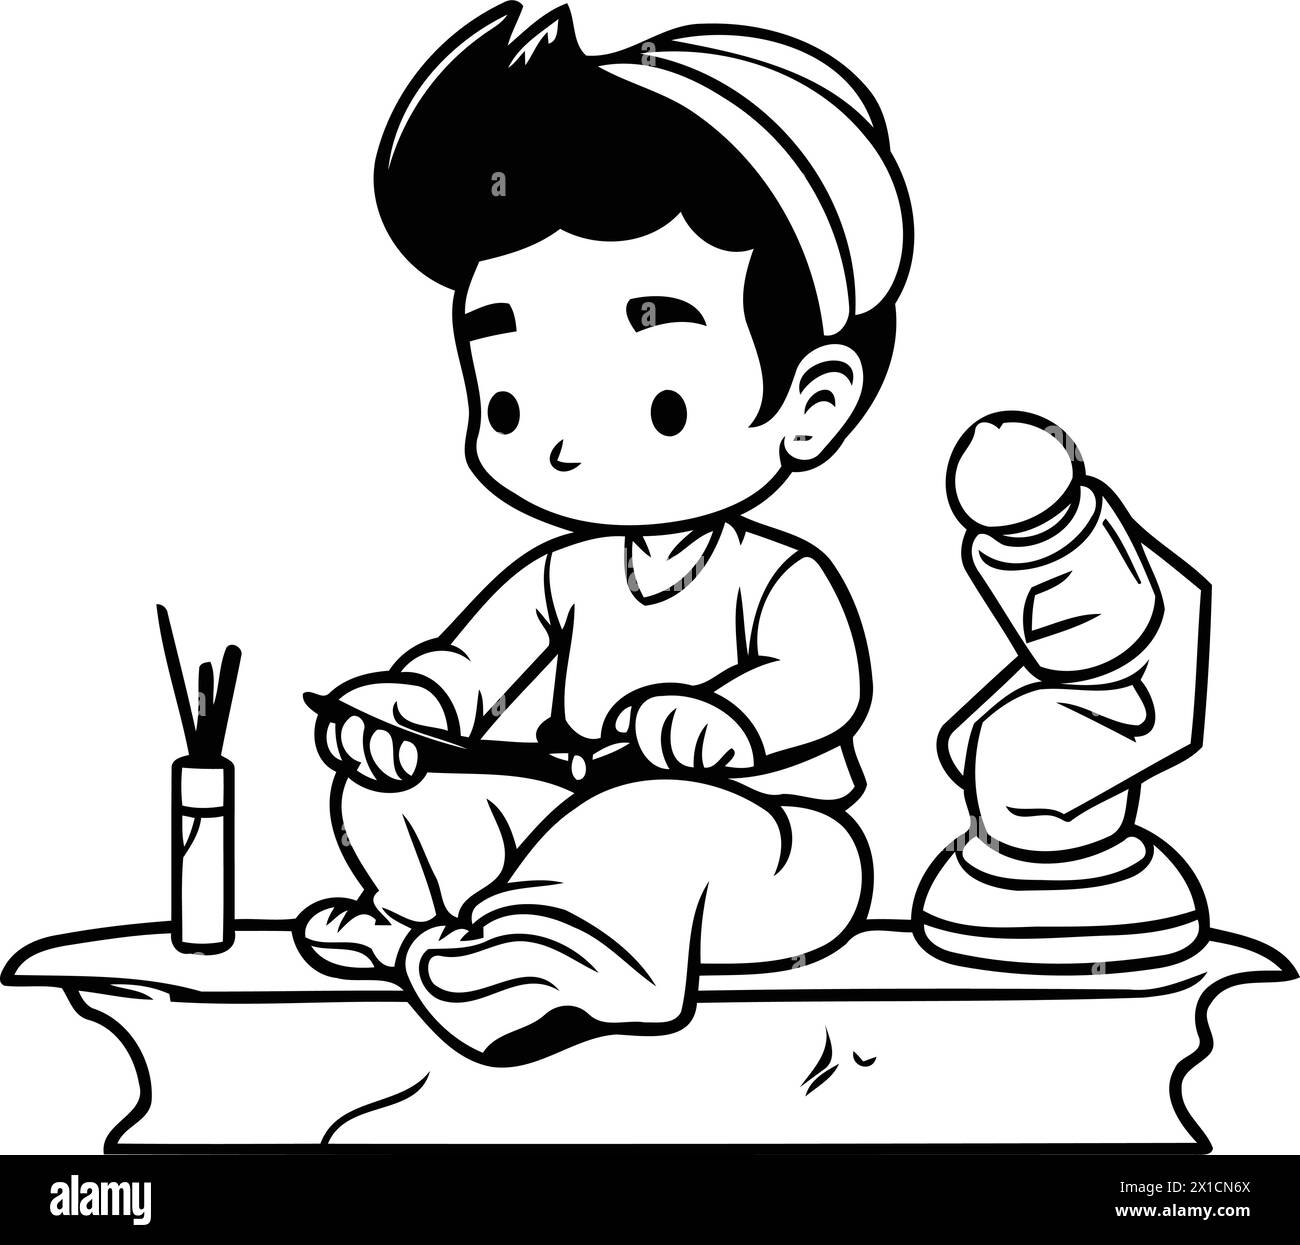 Cute little boy playing with a wooden toy. Vector illustration. Stock Vector